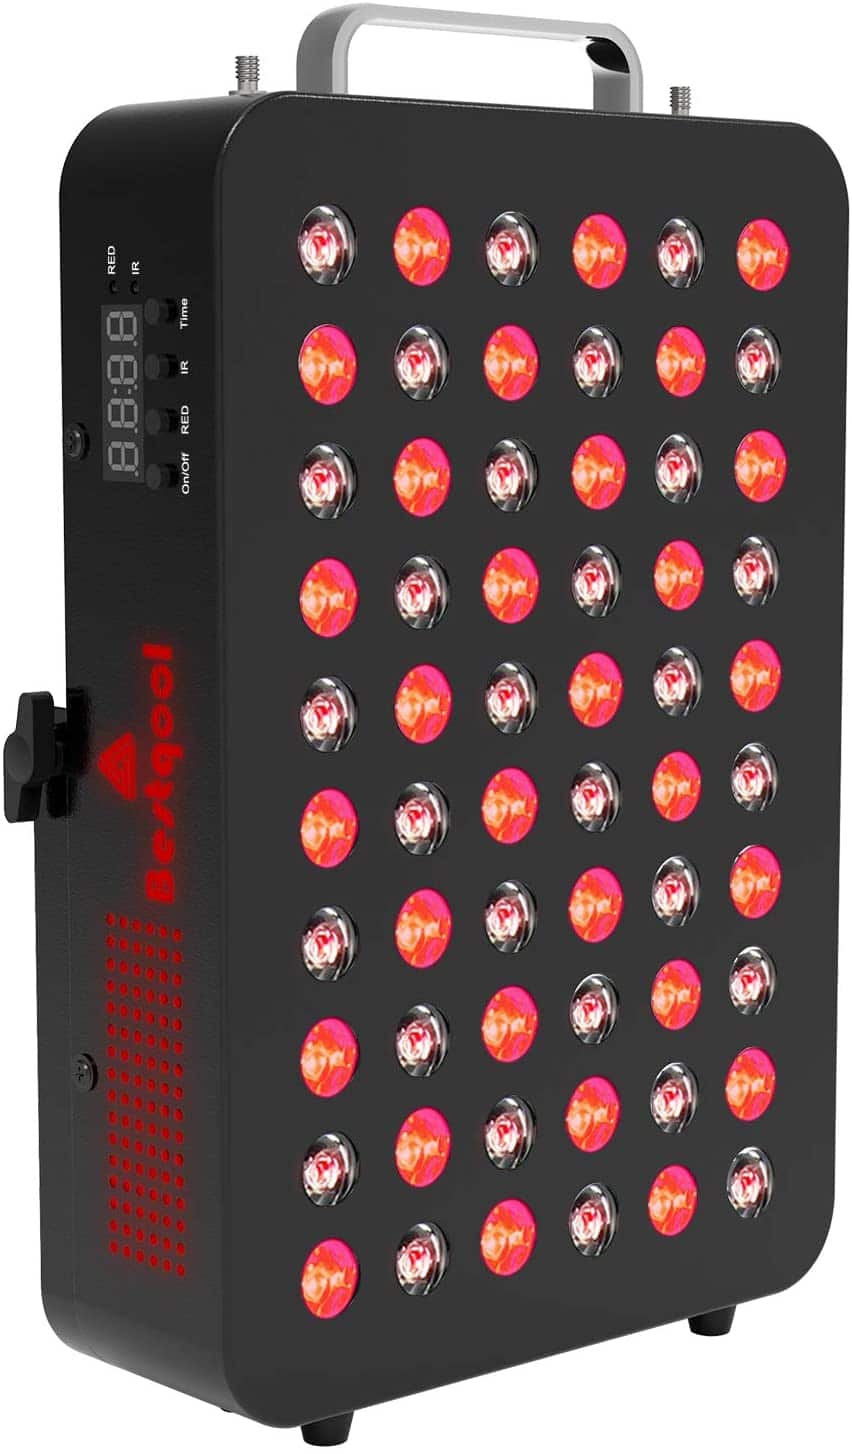 Red Light Therapy Device by Bestqool